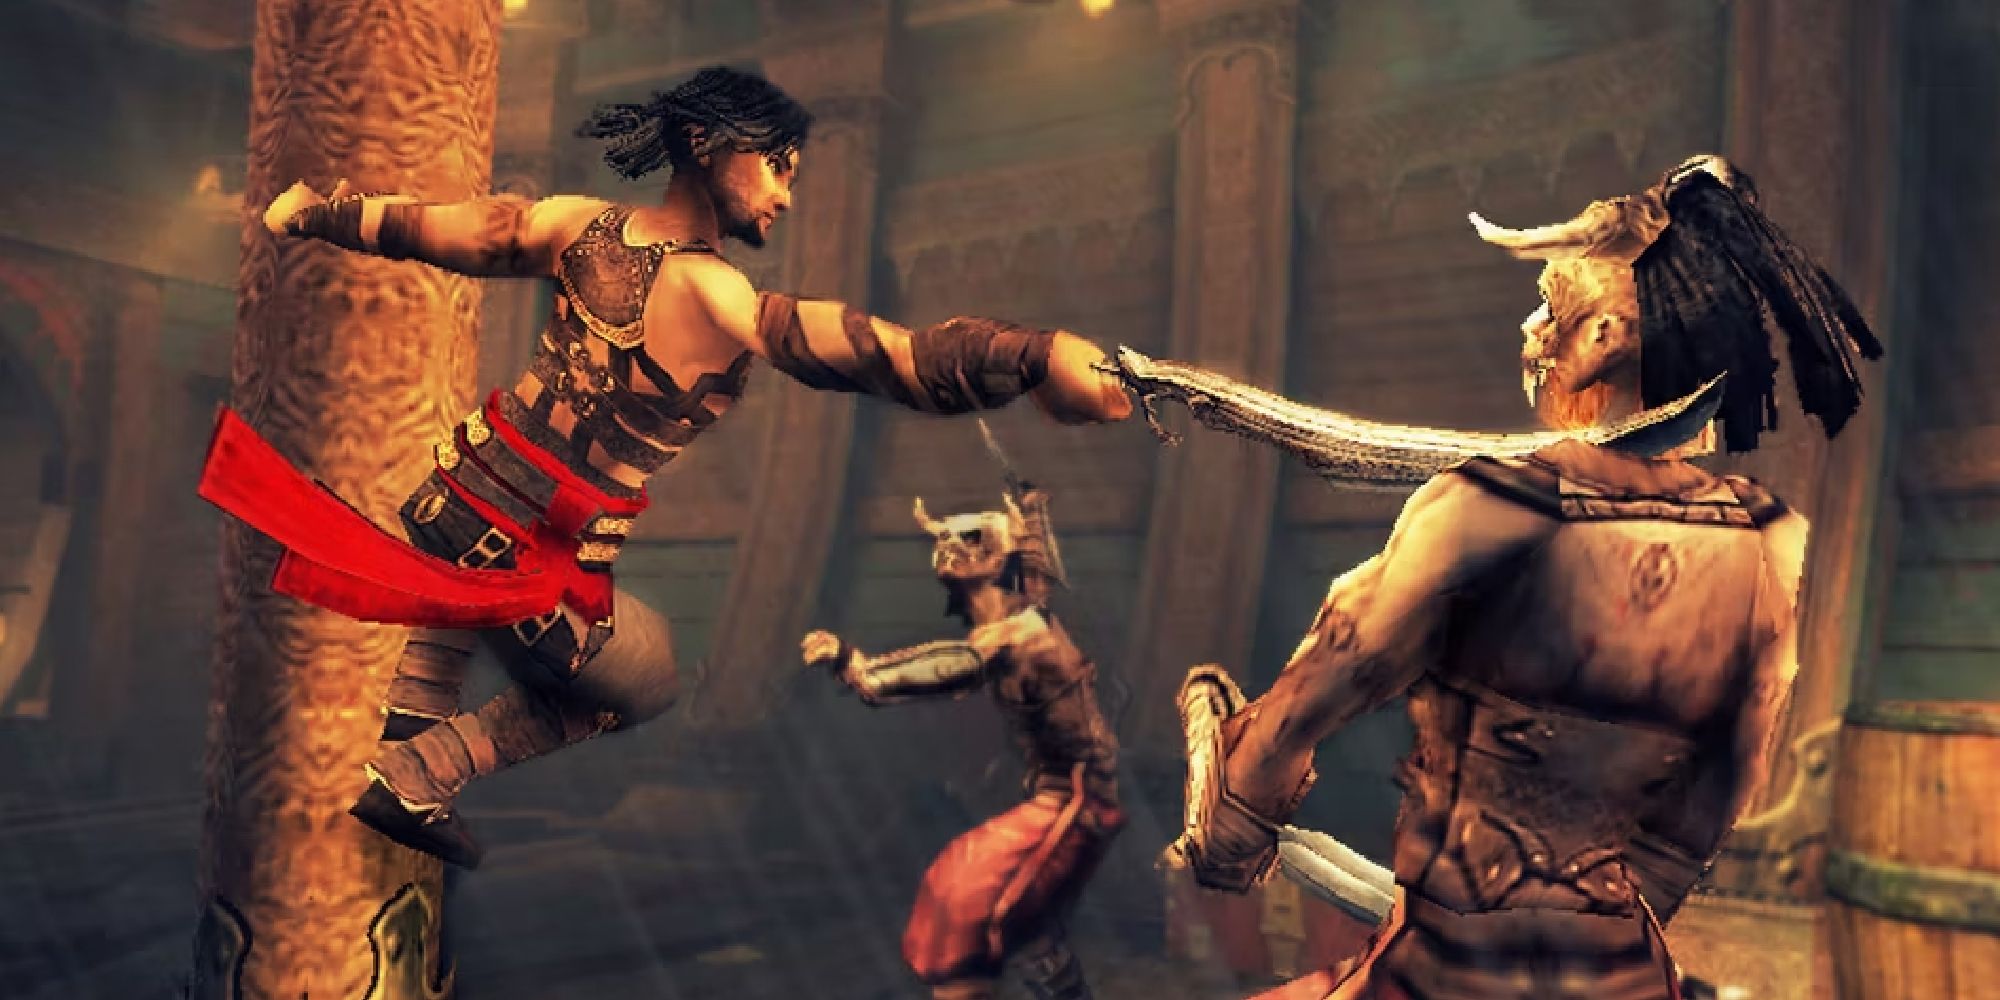 Why We're Worried About Prince Of Persia: The Sands Of Times Remake